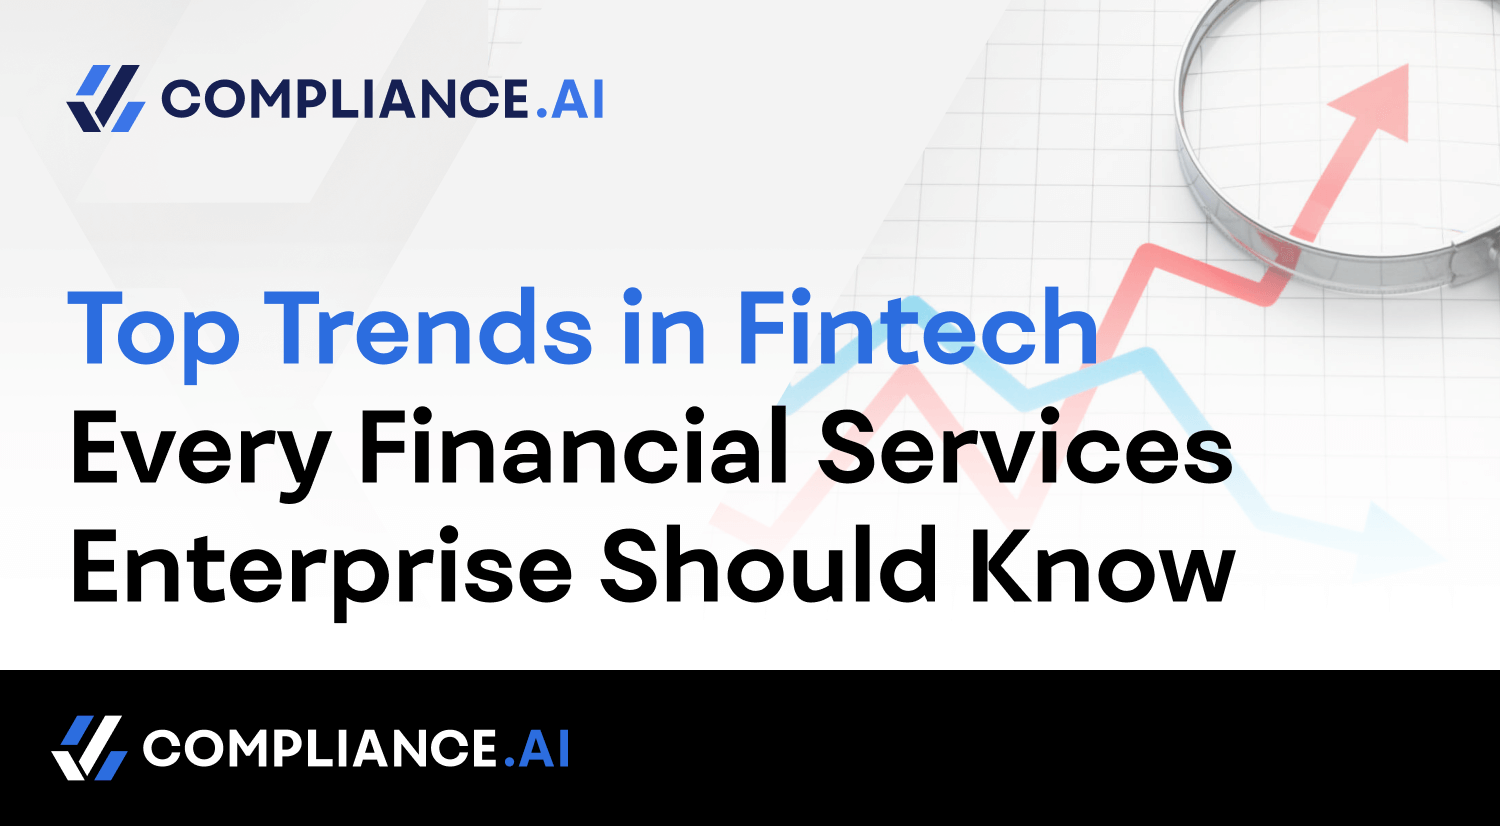 Top Trends in Fintech Every Financial Service Enterprise Should Know